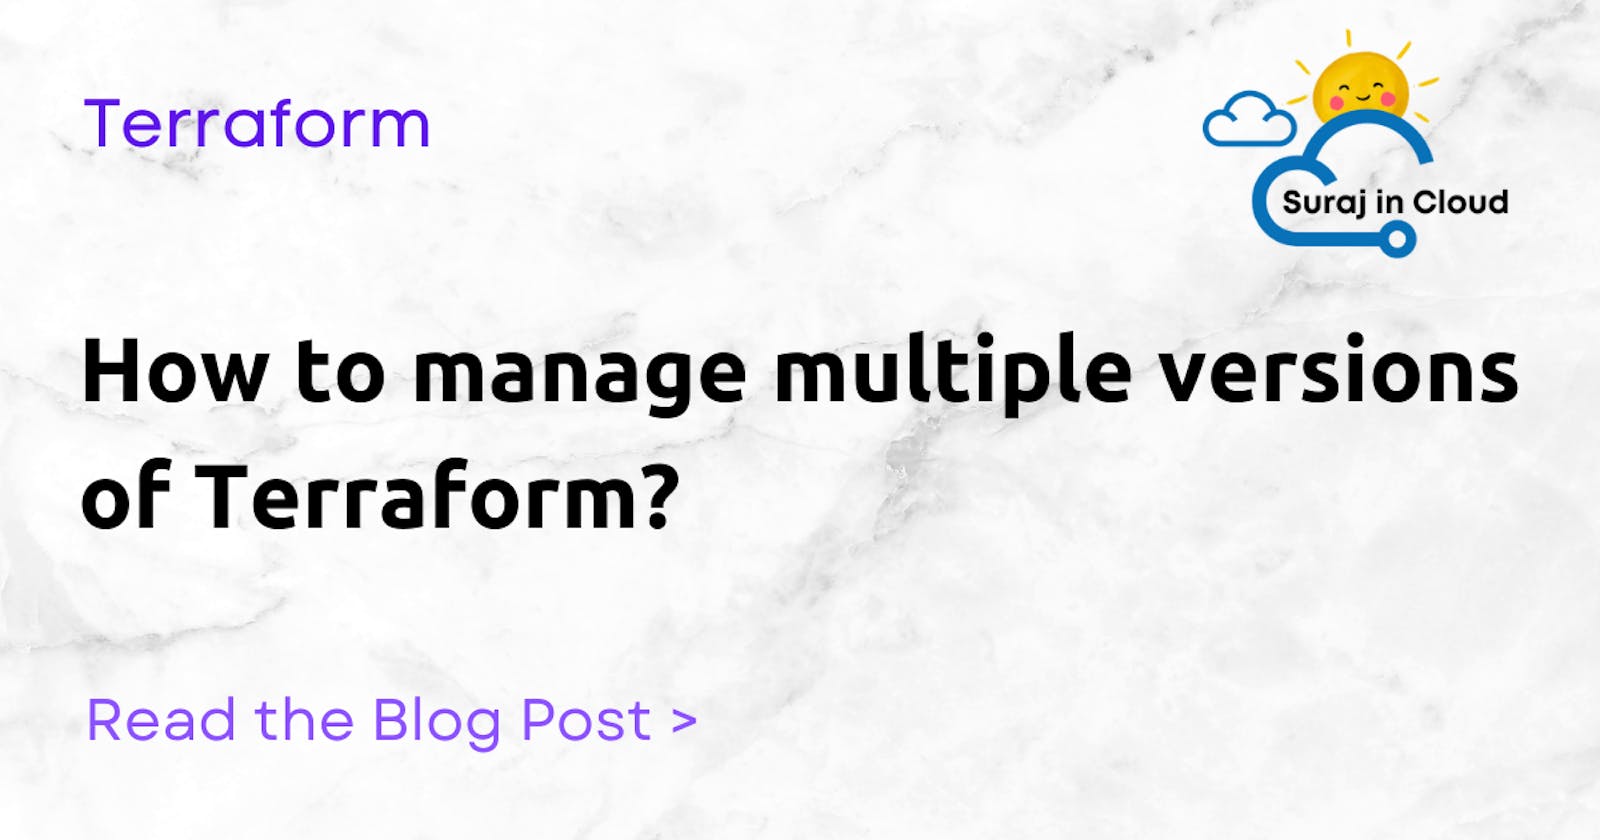 How to manage multiple versions of Terraform?